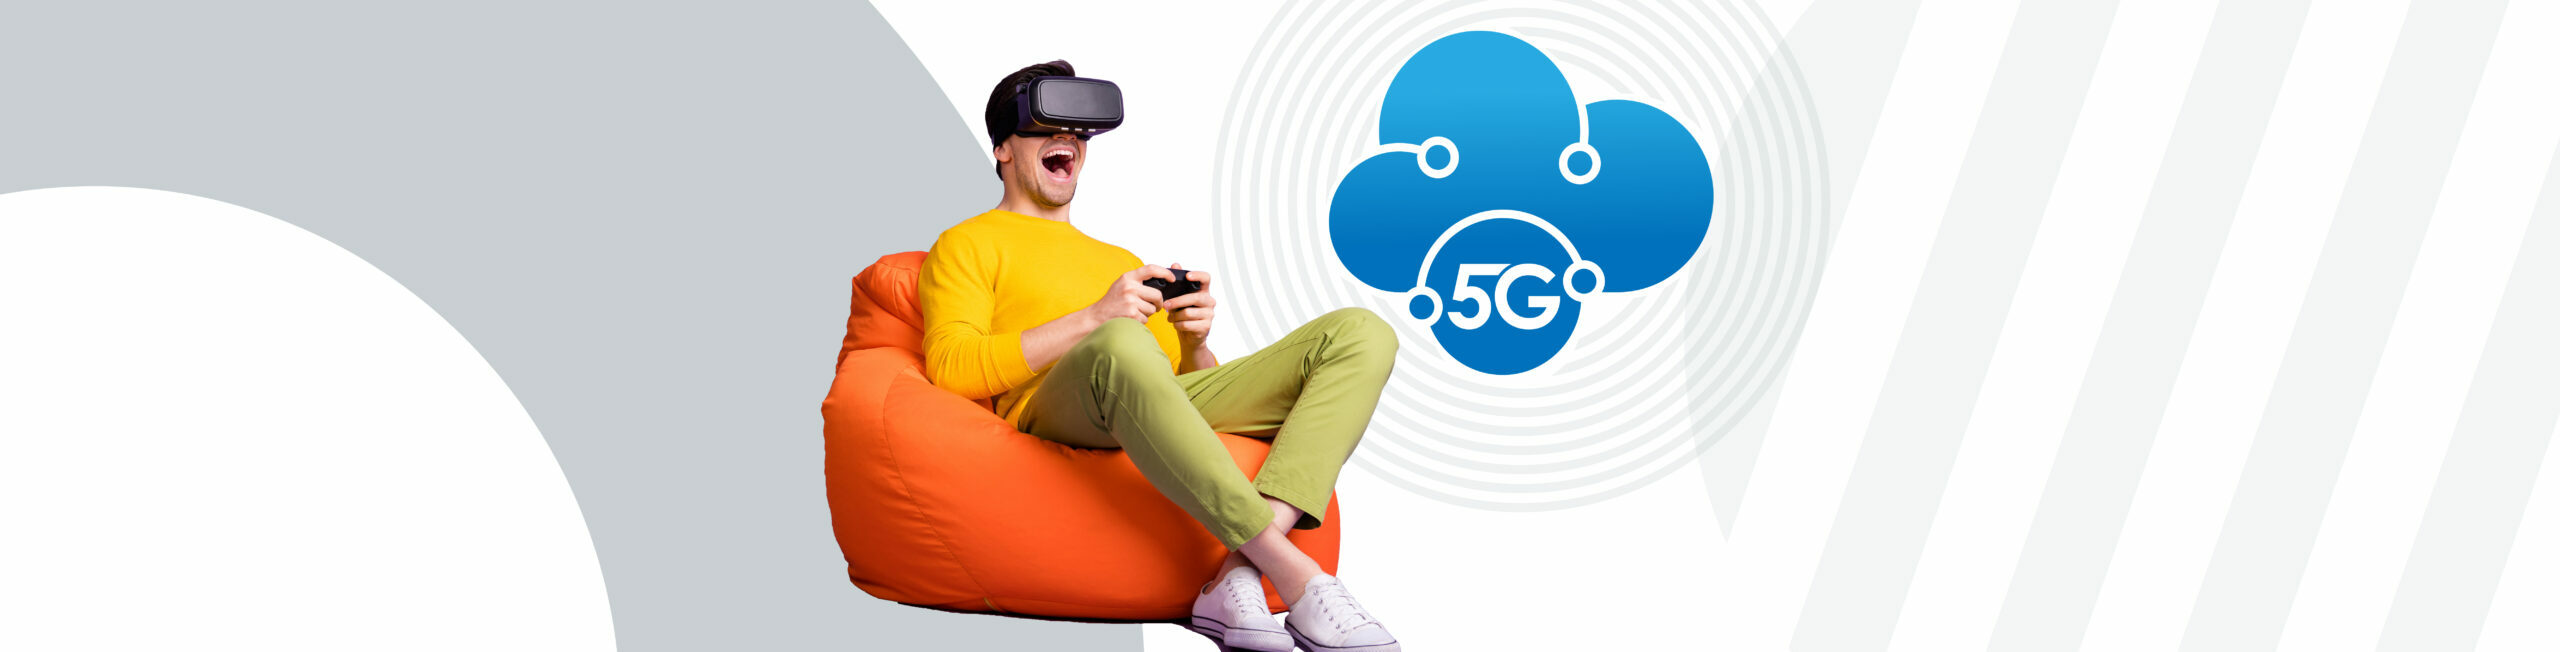 Three Ways Telcos Can Win in a 5G World